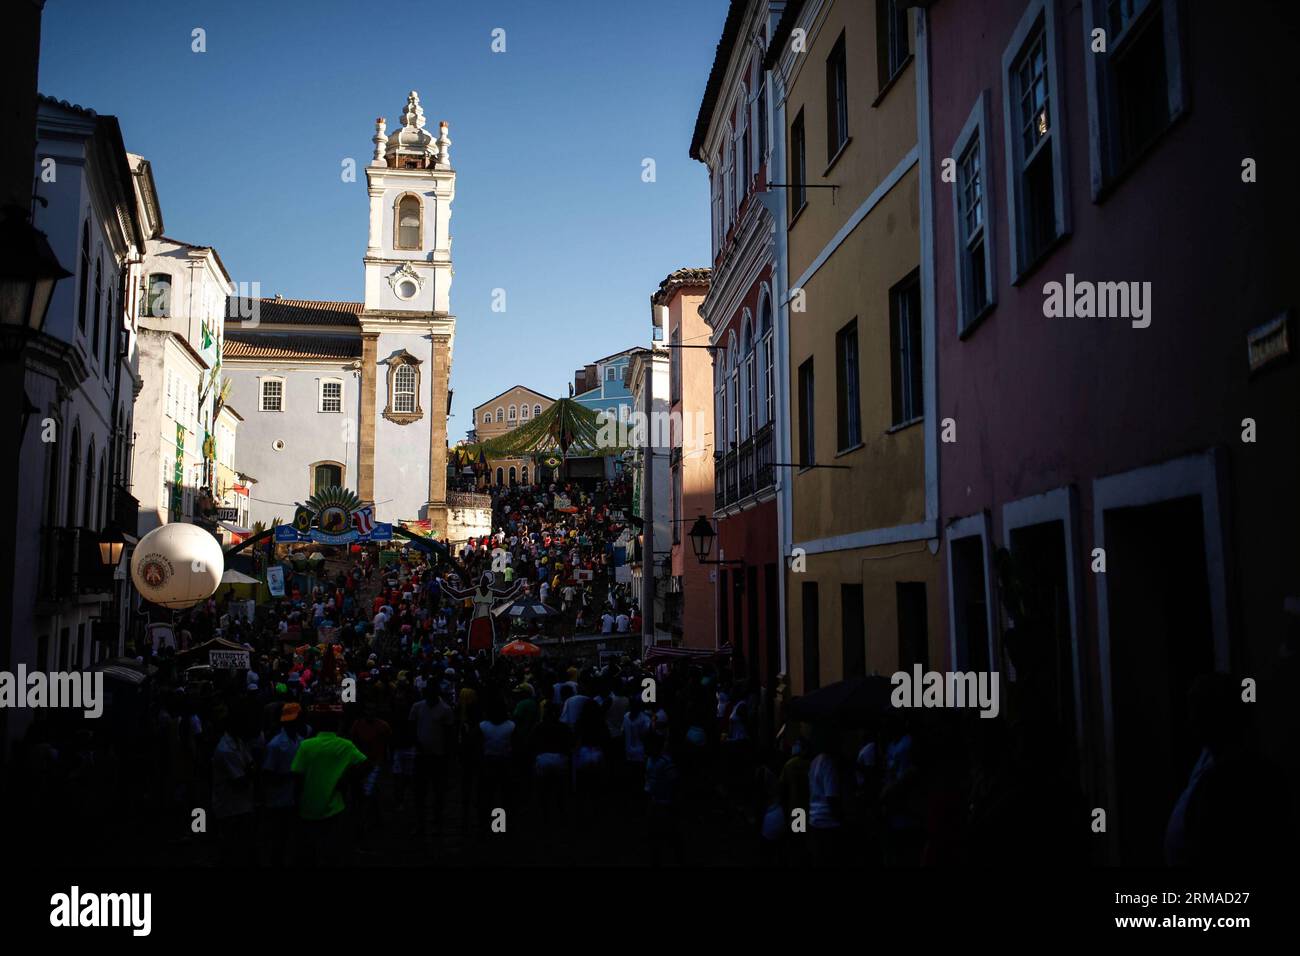 (140702) -- SALVADOR, July 2, 2014 (Xinhua) -- People walk along a street in the Historic Centre of Salvador, Brazil, on July 2, 2014. The Historic Centre of Salvador, requently called the Pelourinho, is extremely rich in historical monuments dating from the 17th through the 19th centuries, and it was named a world cultural center by UNESCO in 1985. (Xinhua/Jhon Paz) BRASIL-SALVADOR-WORD CUP 2014-TOURISM PUBLICATIONxNOTxINxCHN   Salvador July 2 2014 XINHUA Celebrities Walk Along a Street in The Historic Centre of Salvador Brazil ON July 2 2014 The Historic Centre of Salvador  called The Pelour Stock Photo